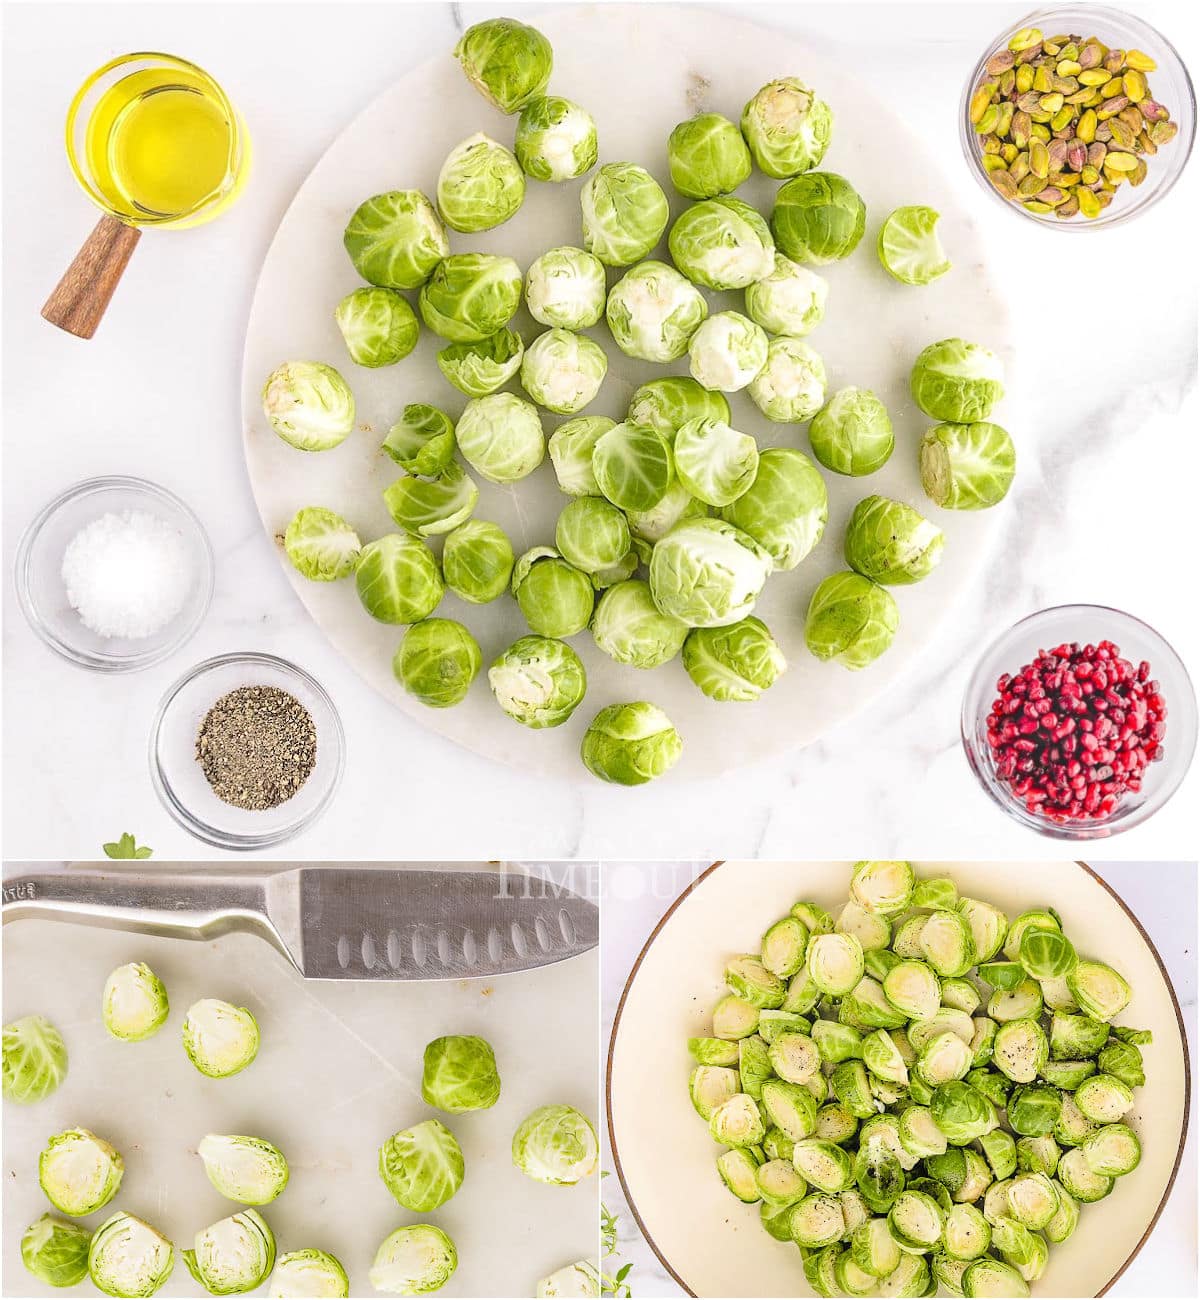 three image collage showing how to roast brussels sprouts step by step.